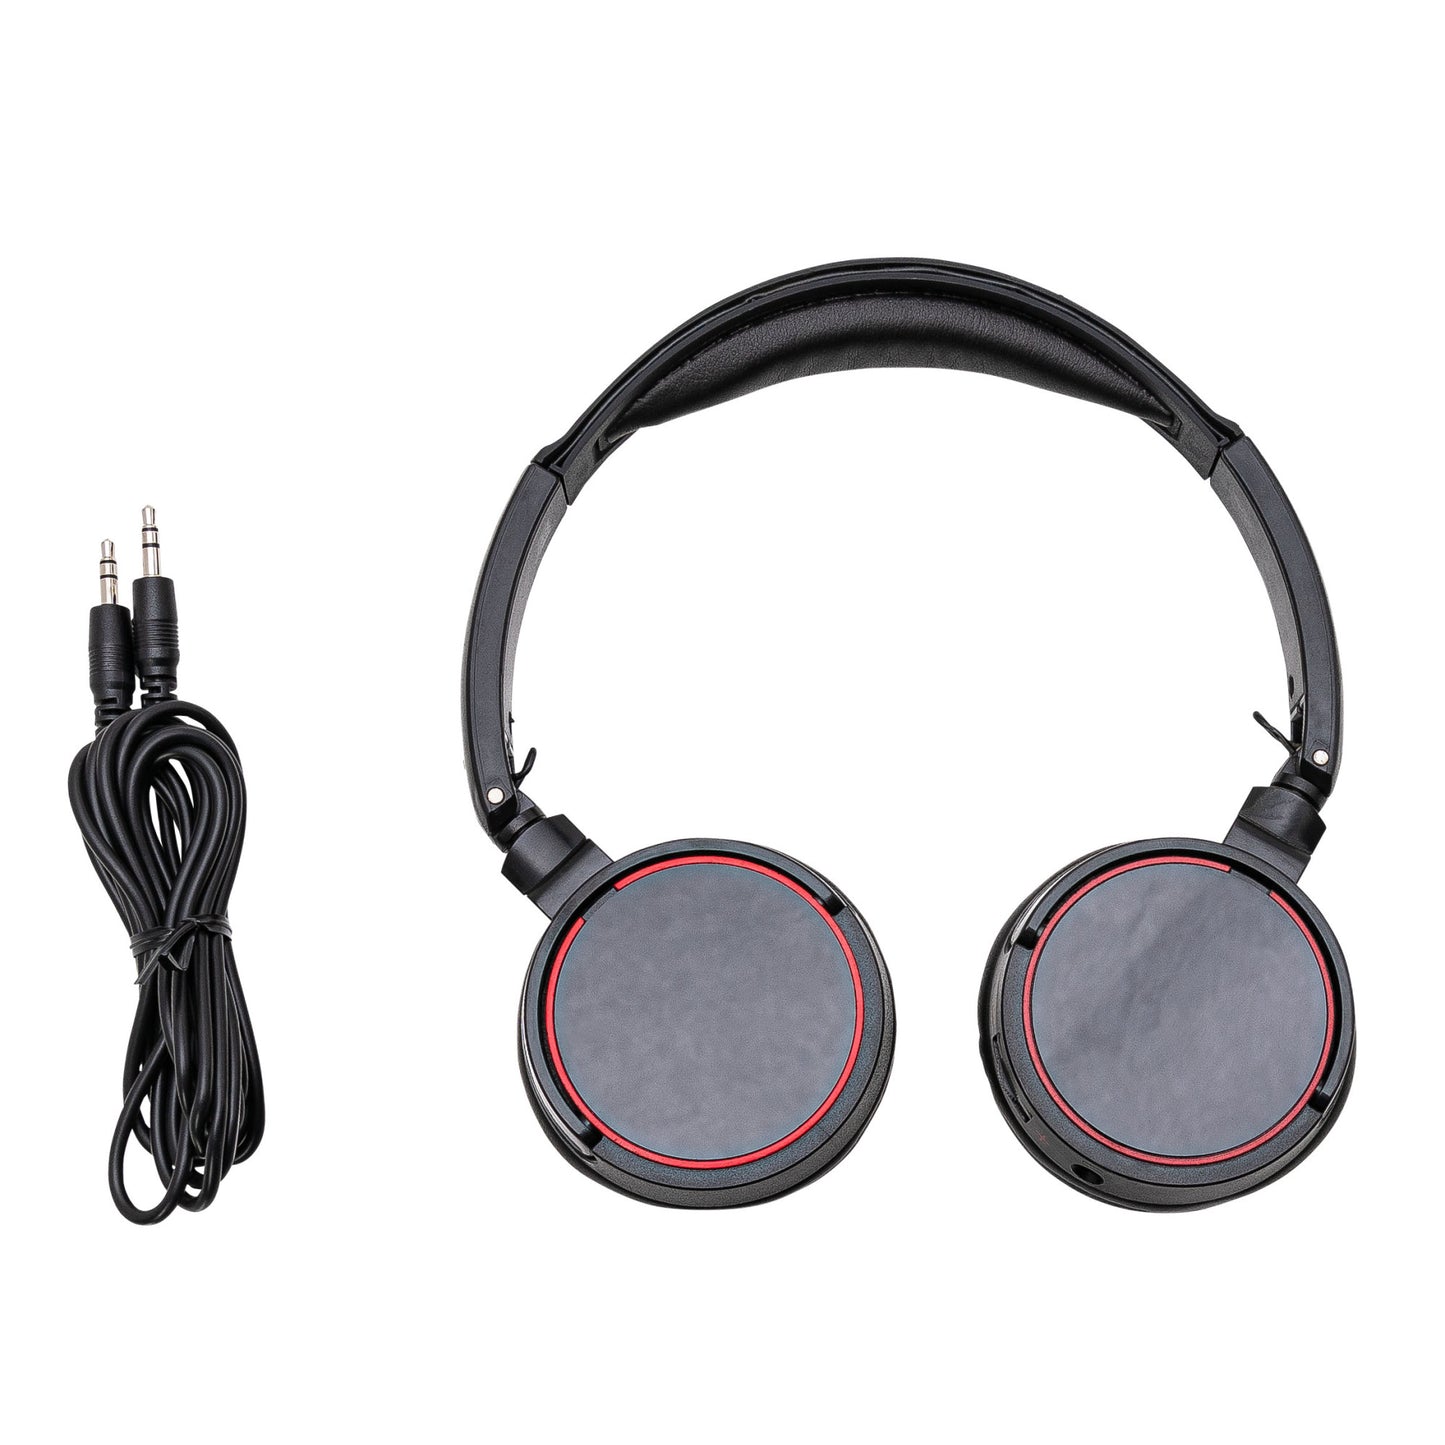 HQ Headphones with Built-In Volume Control